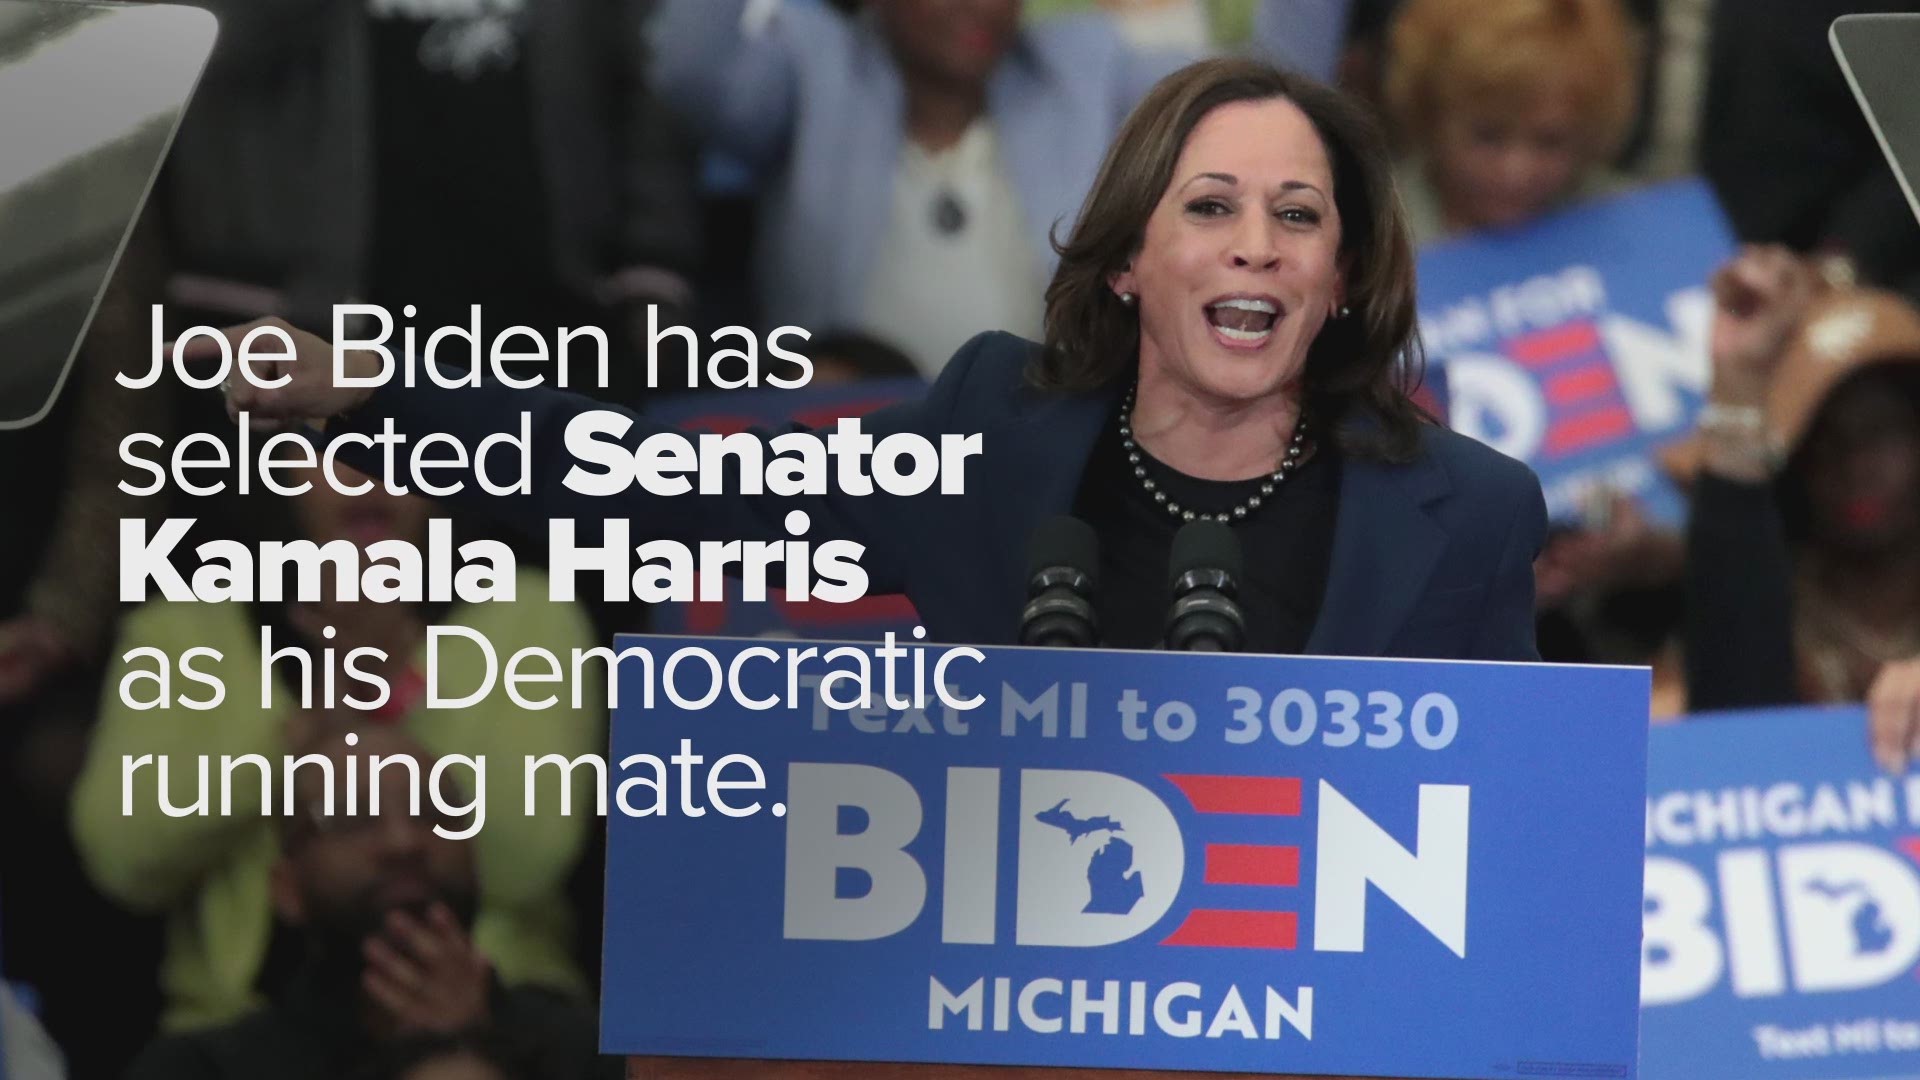 Senator Kamala Harris has made history as the first woman of color to be on a major party ticket for a presidential election.